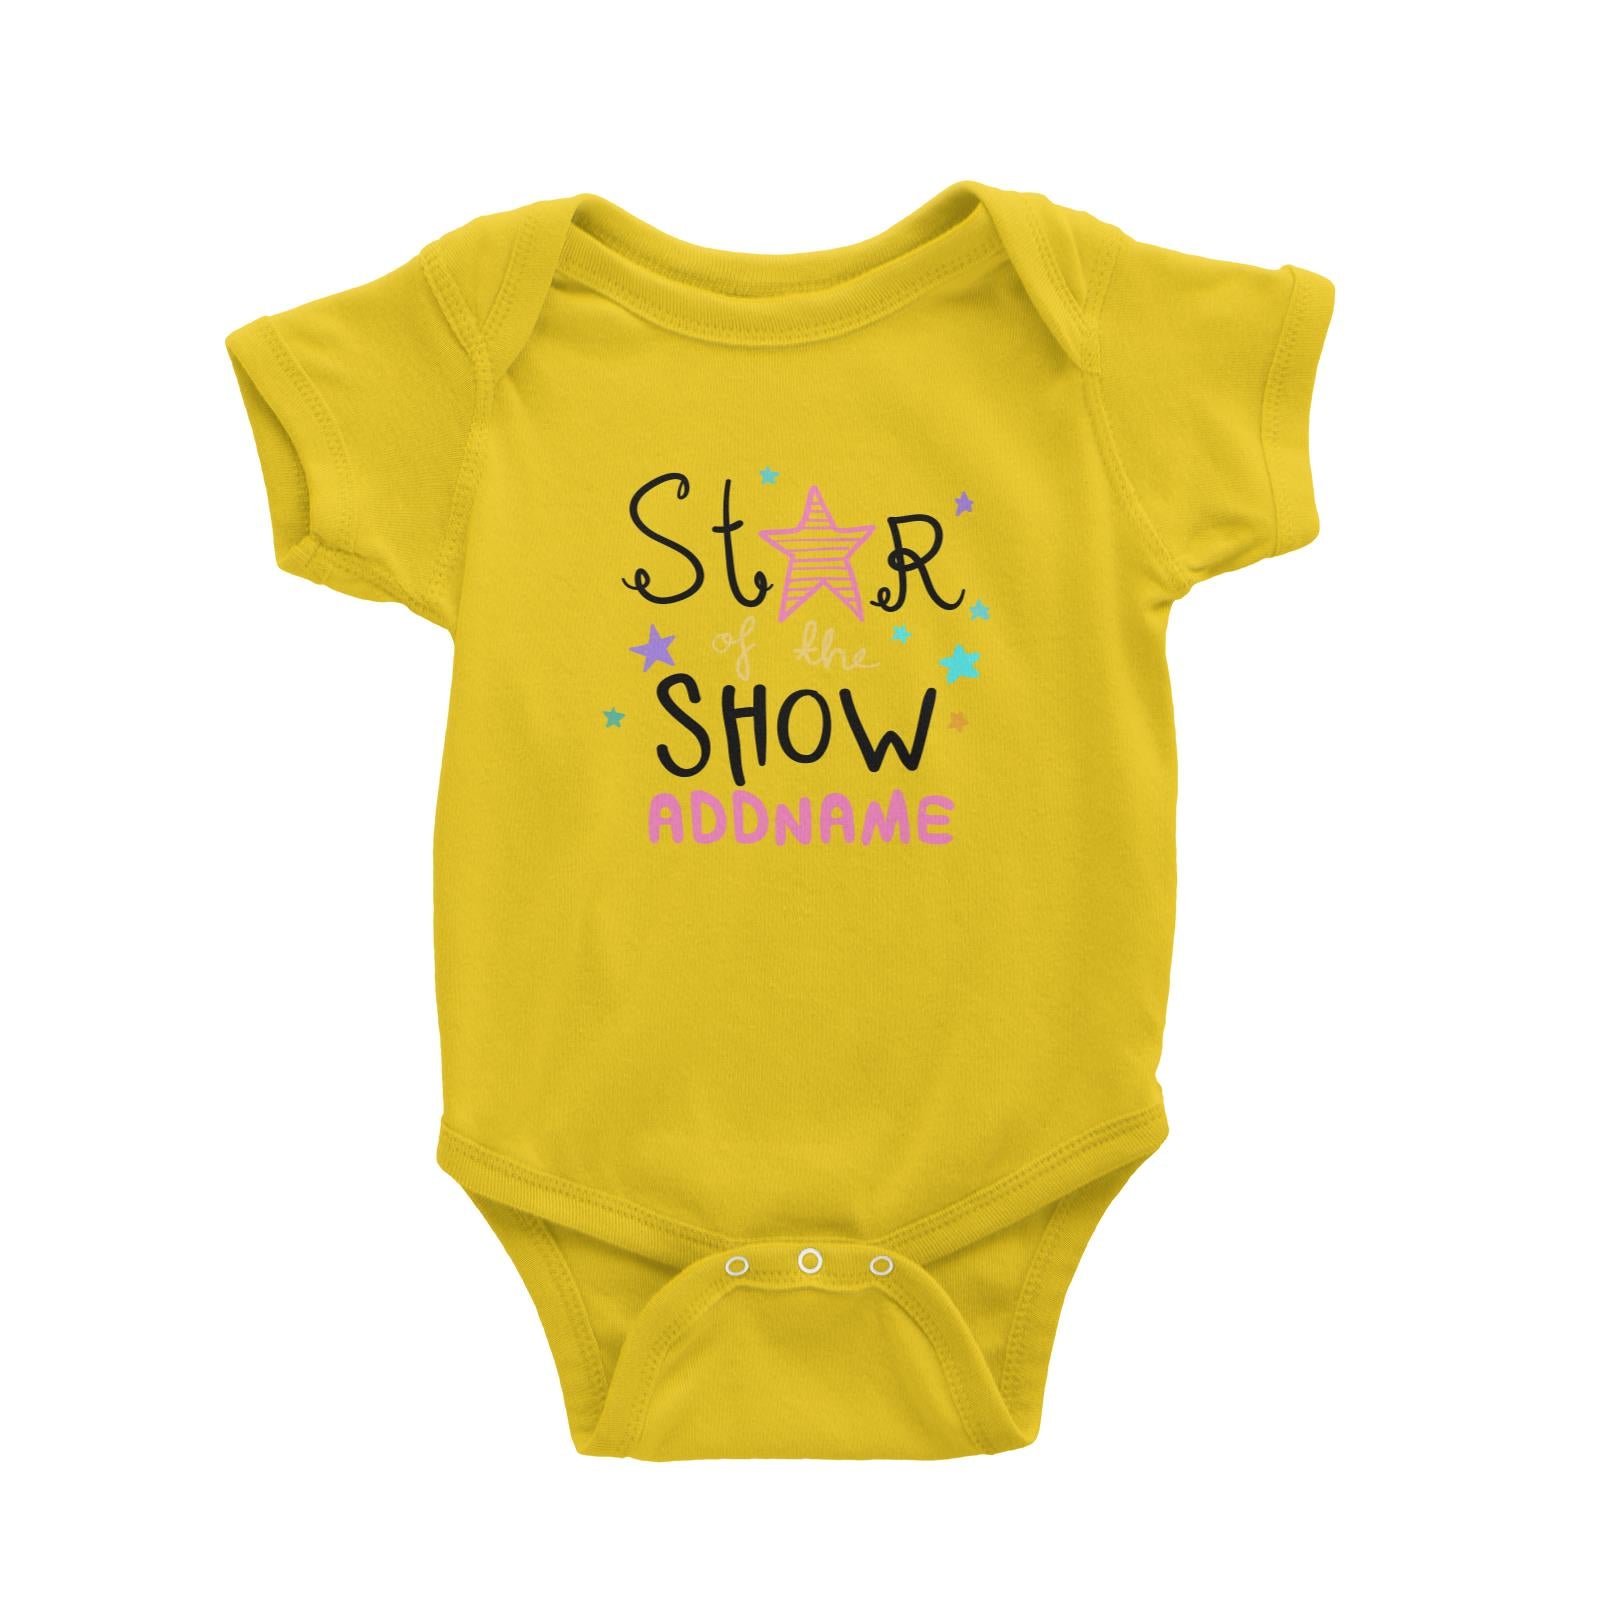 Children's Day Gift Series Star Of The Show Pink Addname Baby Romper